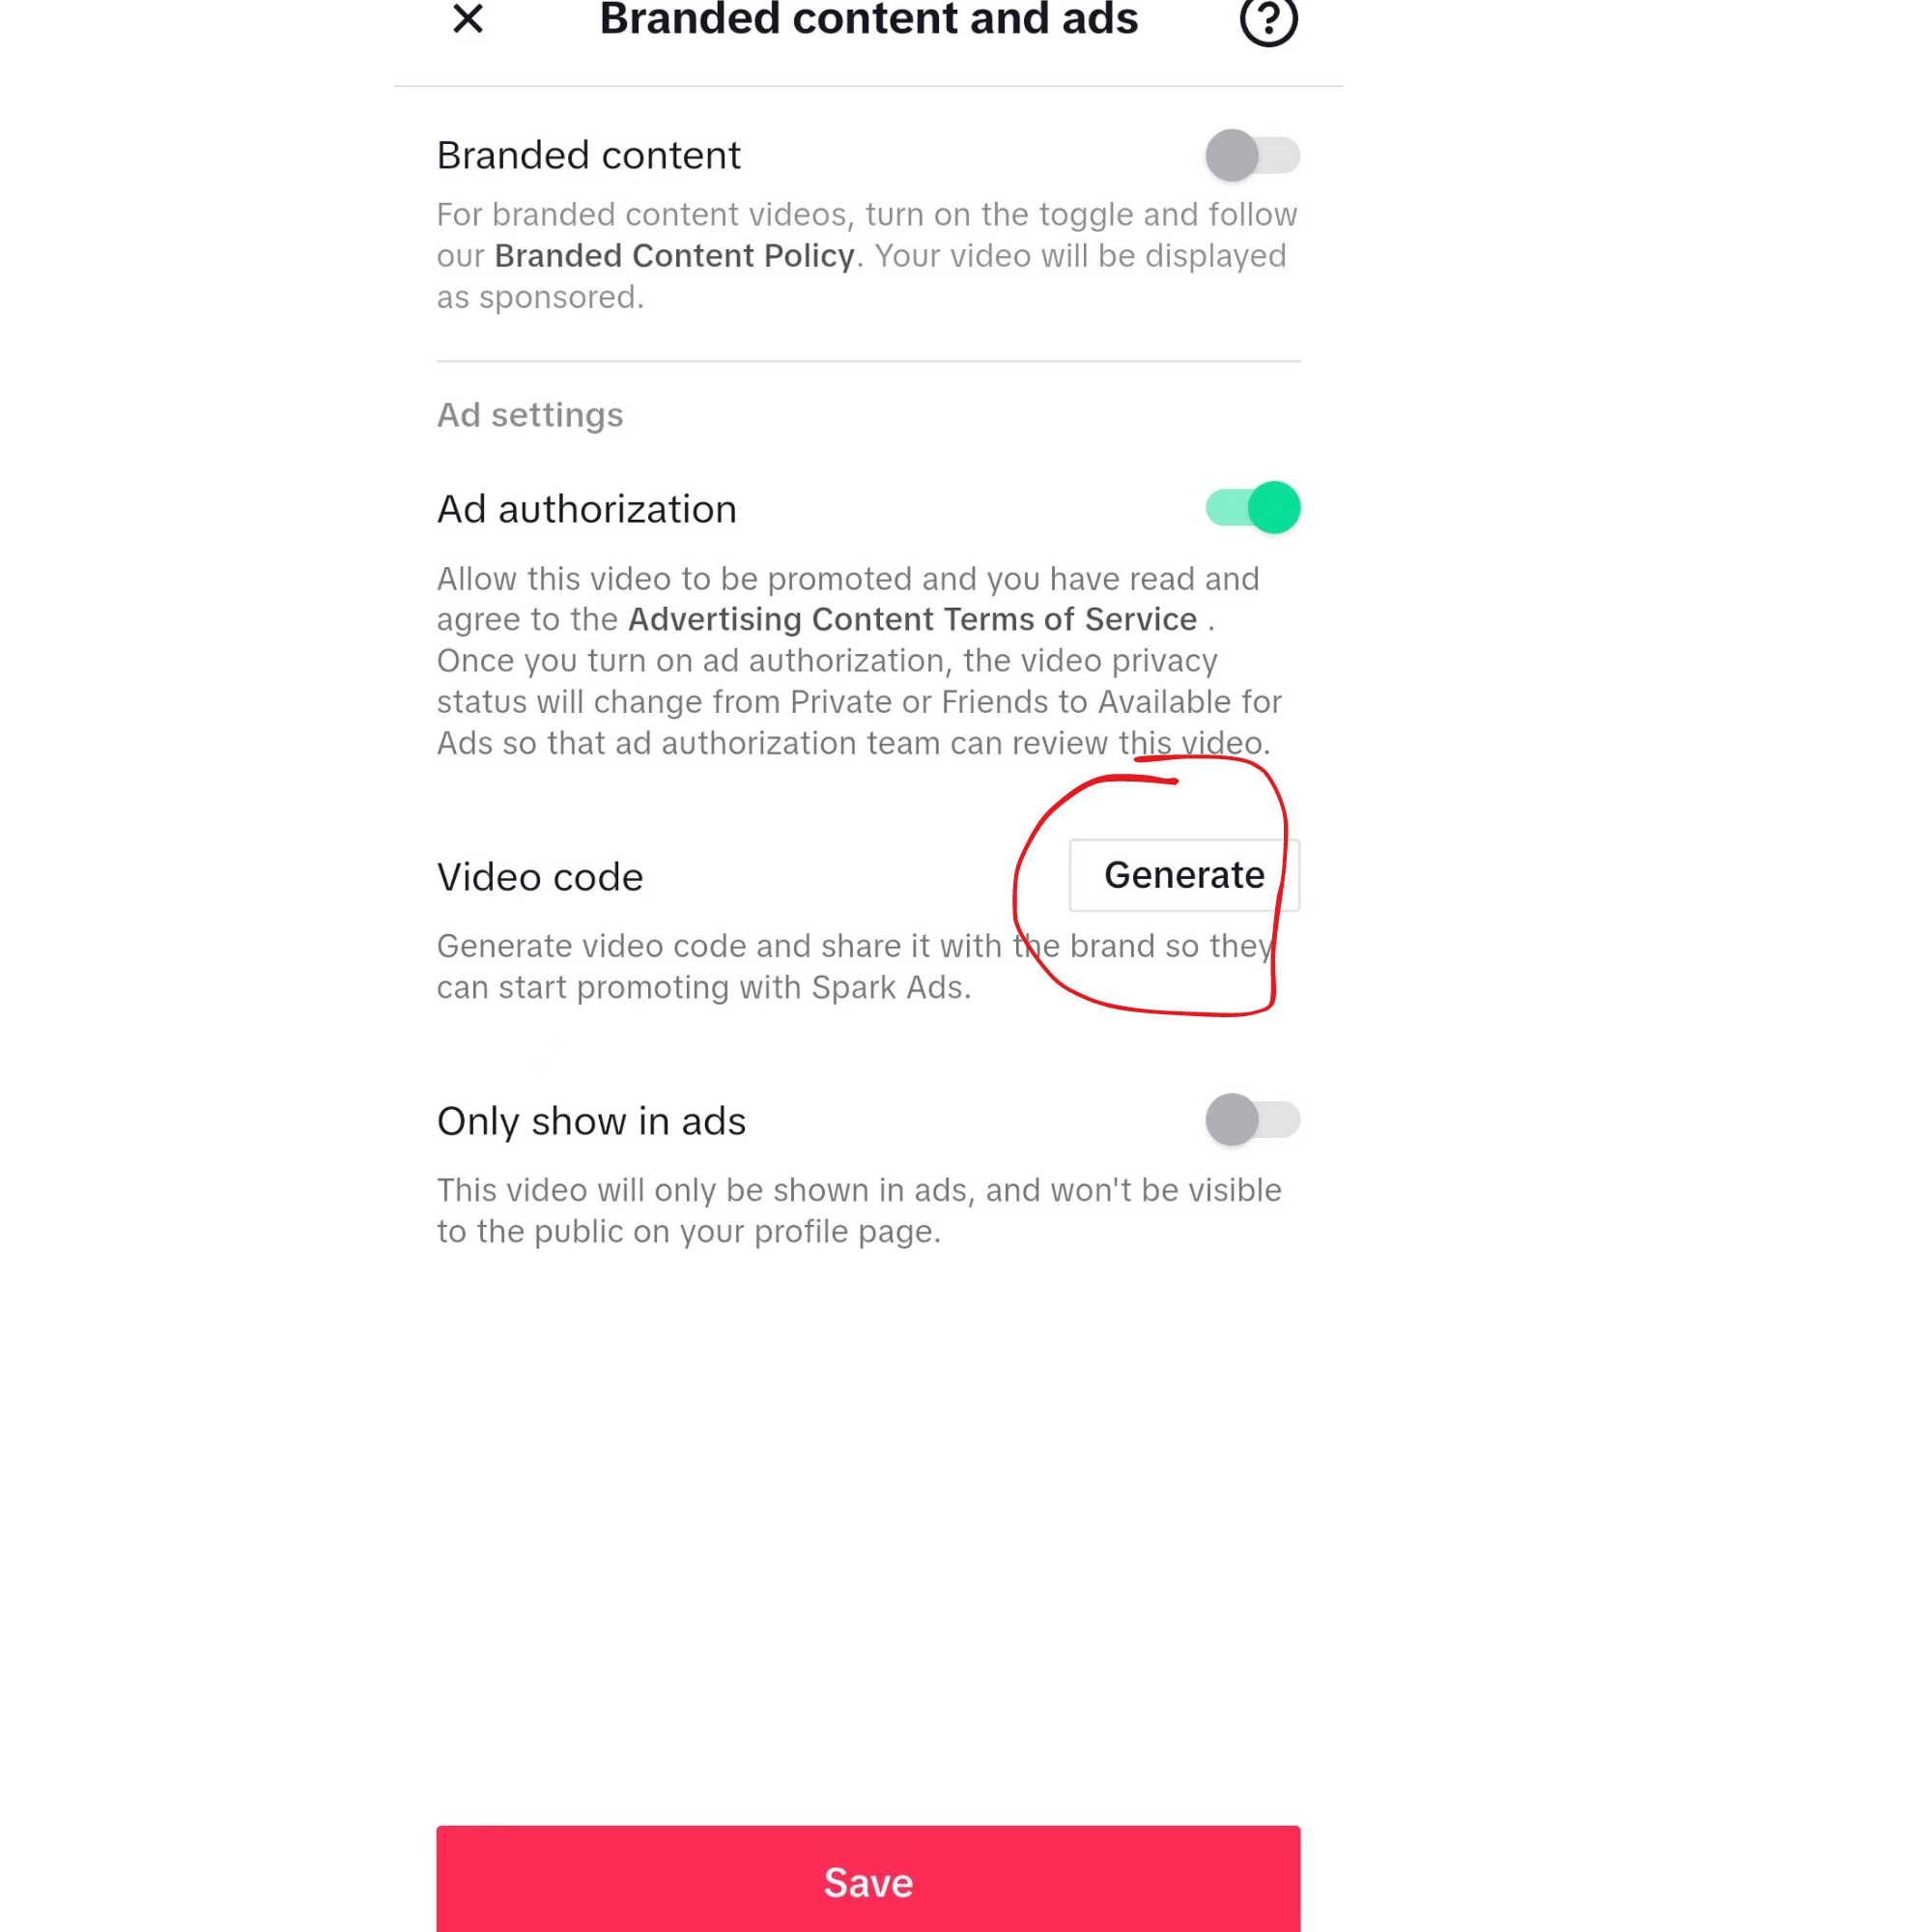 How to get the AD AUTHORIZATION code in TikTok